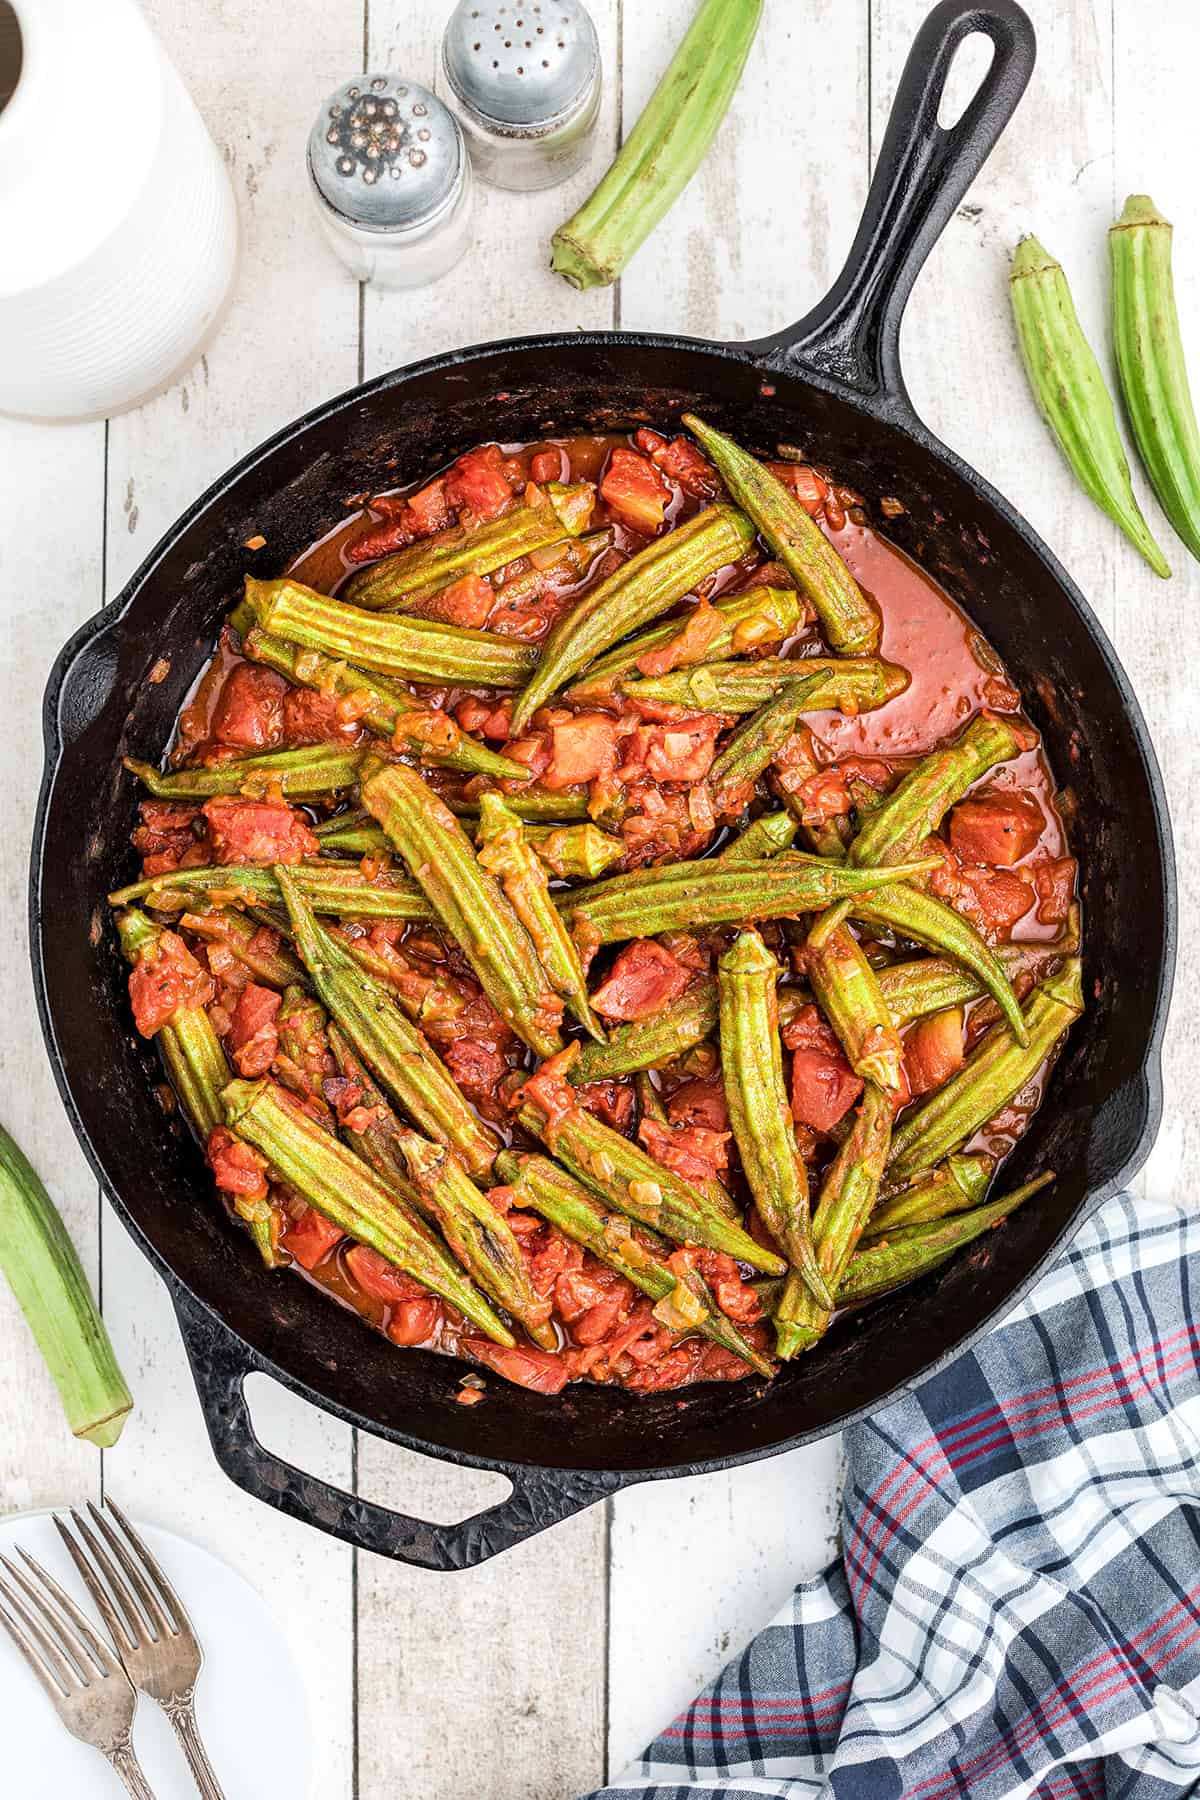 Finished okra and tomatoes in a cast iron skillet.